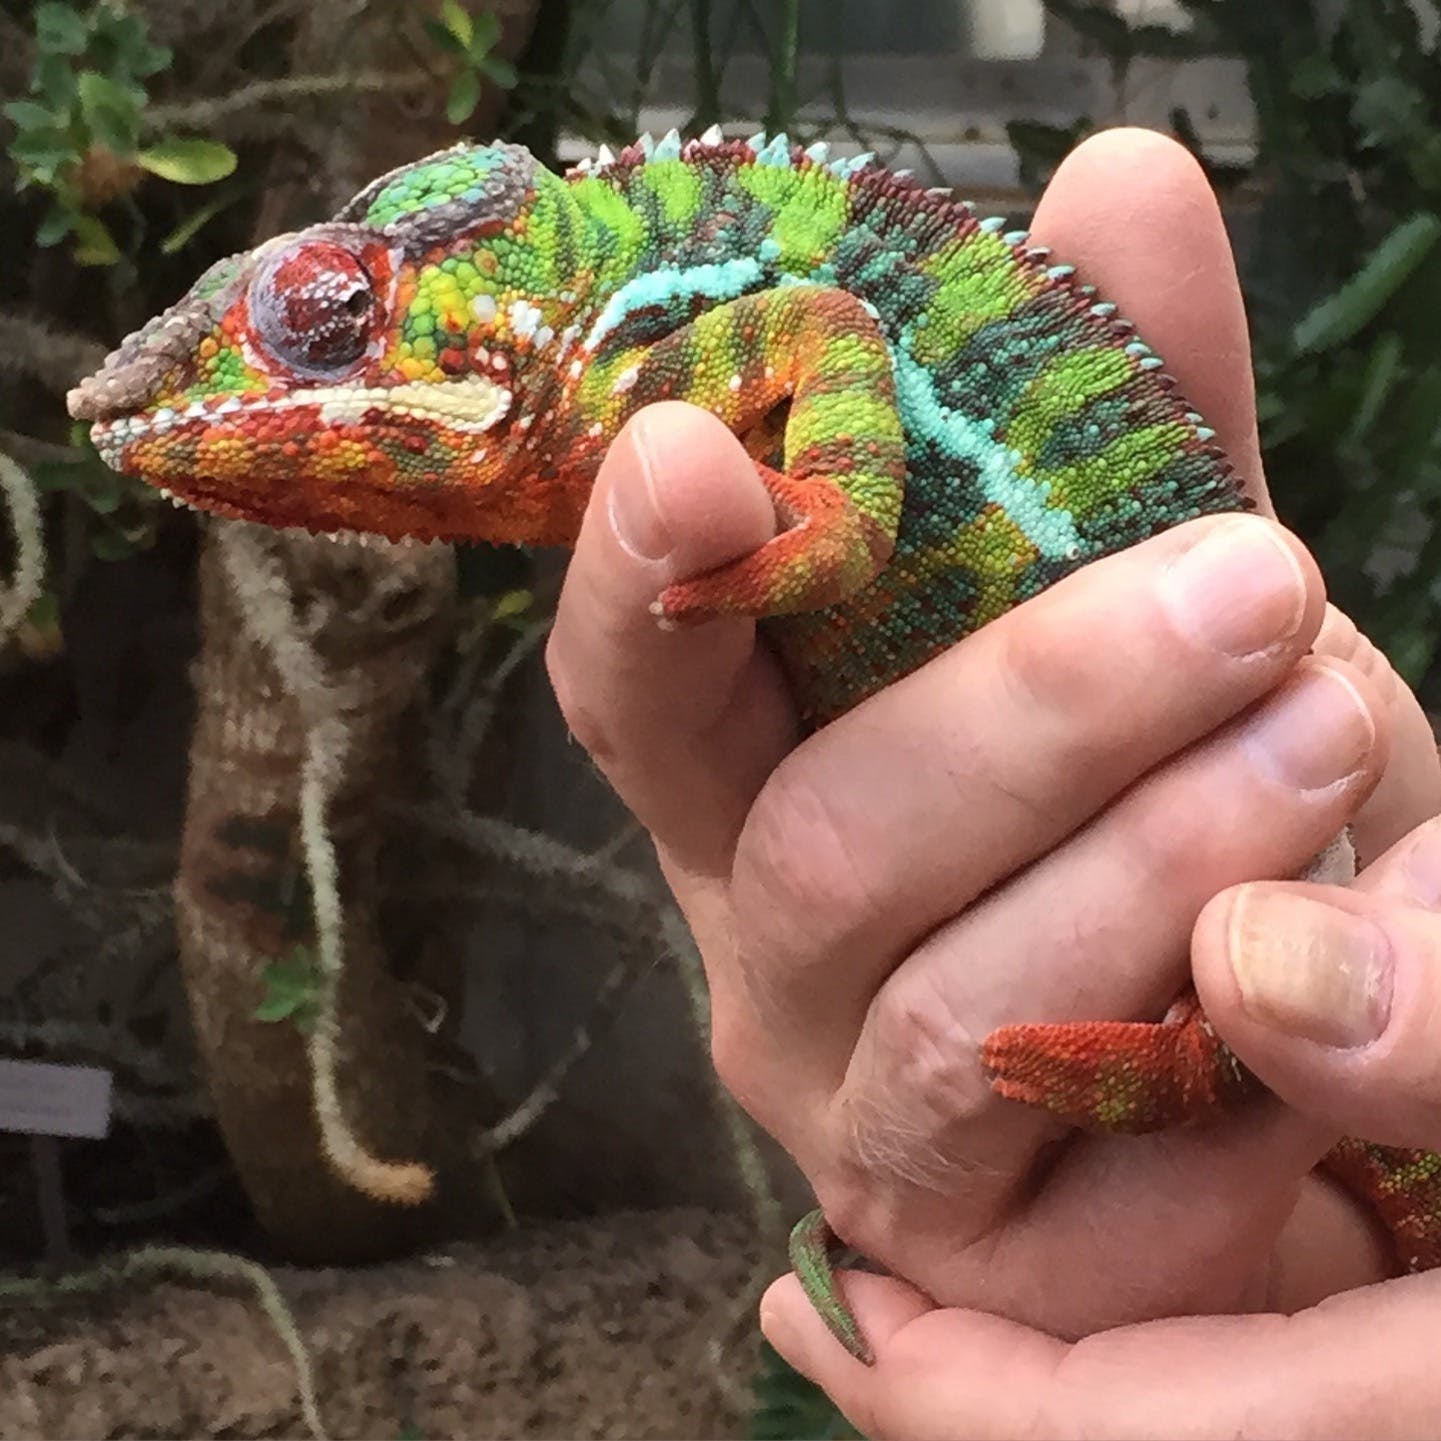 Have you seen a chameleon in real life? – From Jane M. Mason